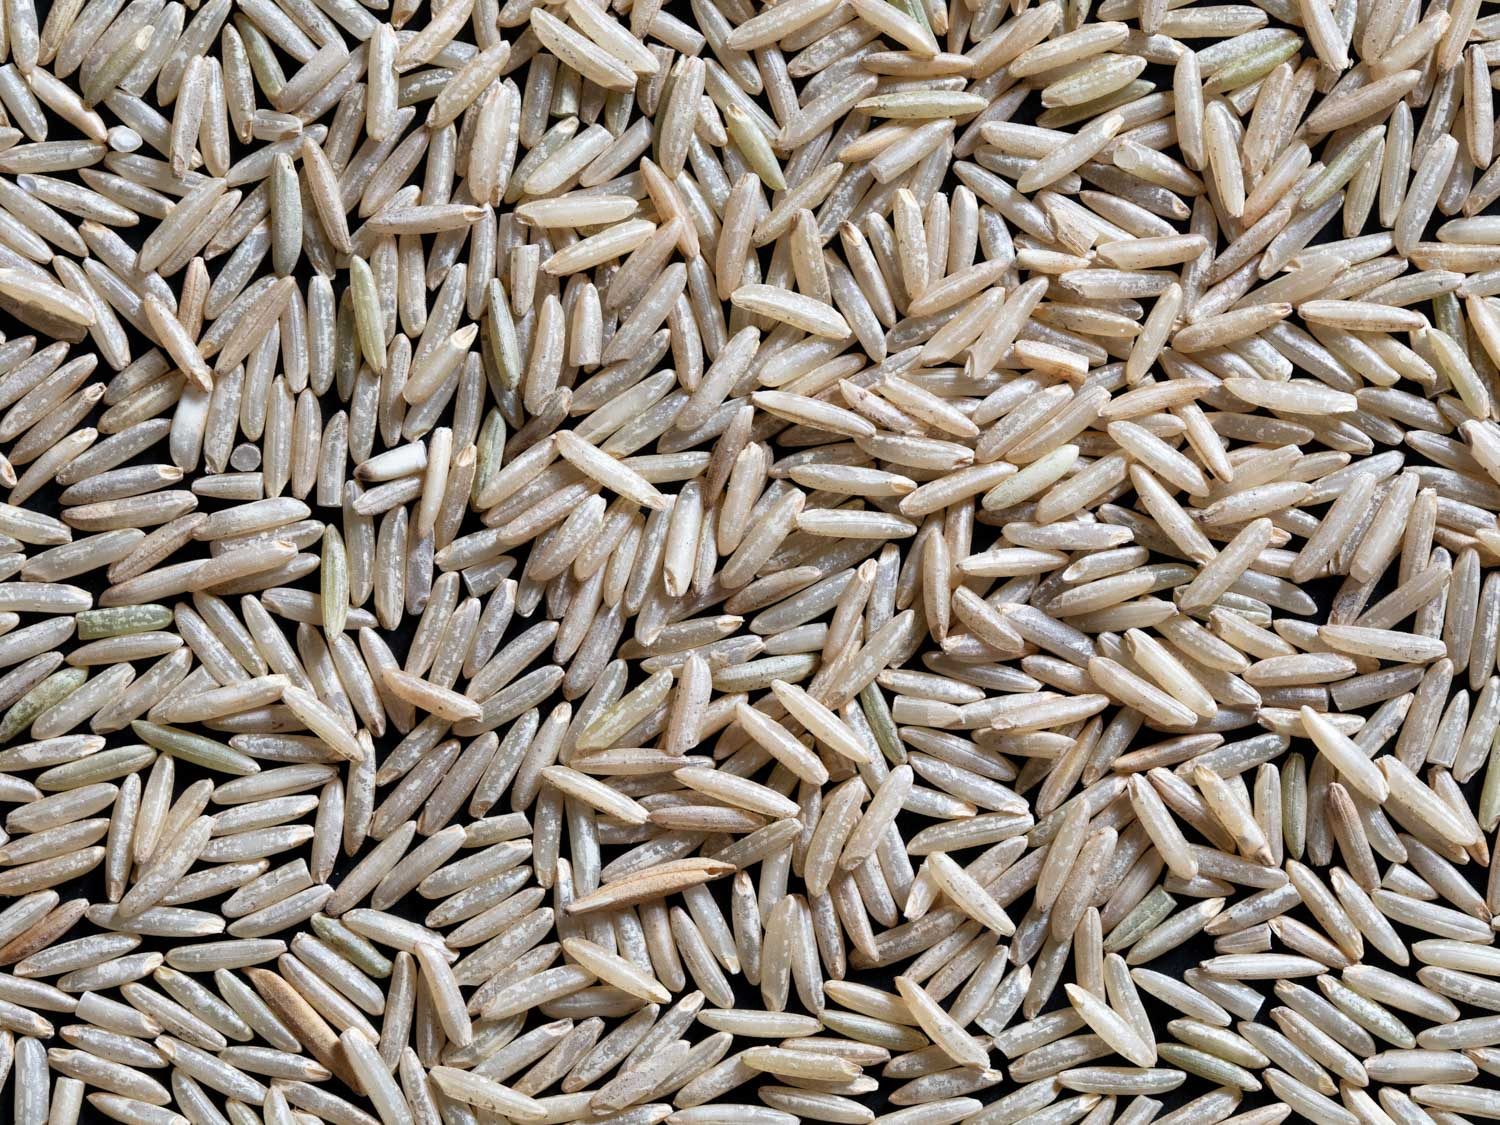 Overhead close-up of long brown basmati rice grains on a flat surface